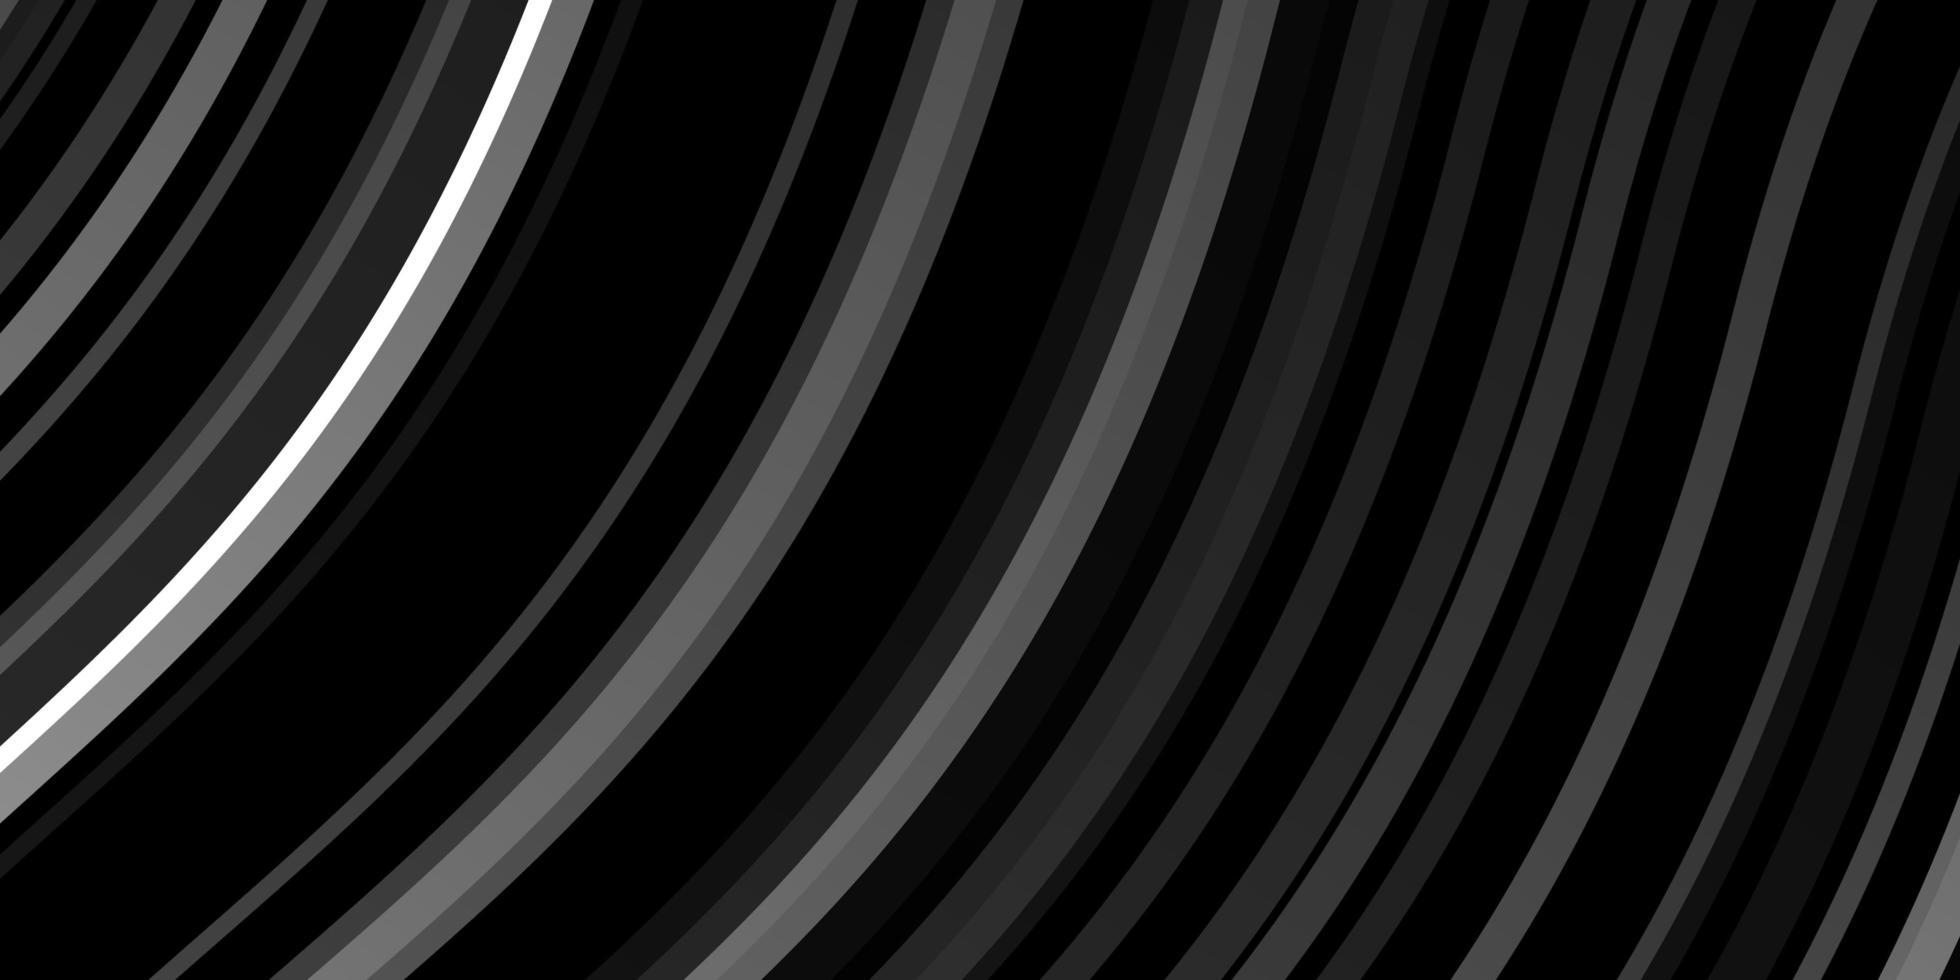 Dark Gray vector texture with wry lines.